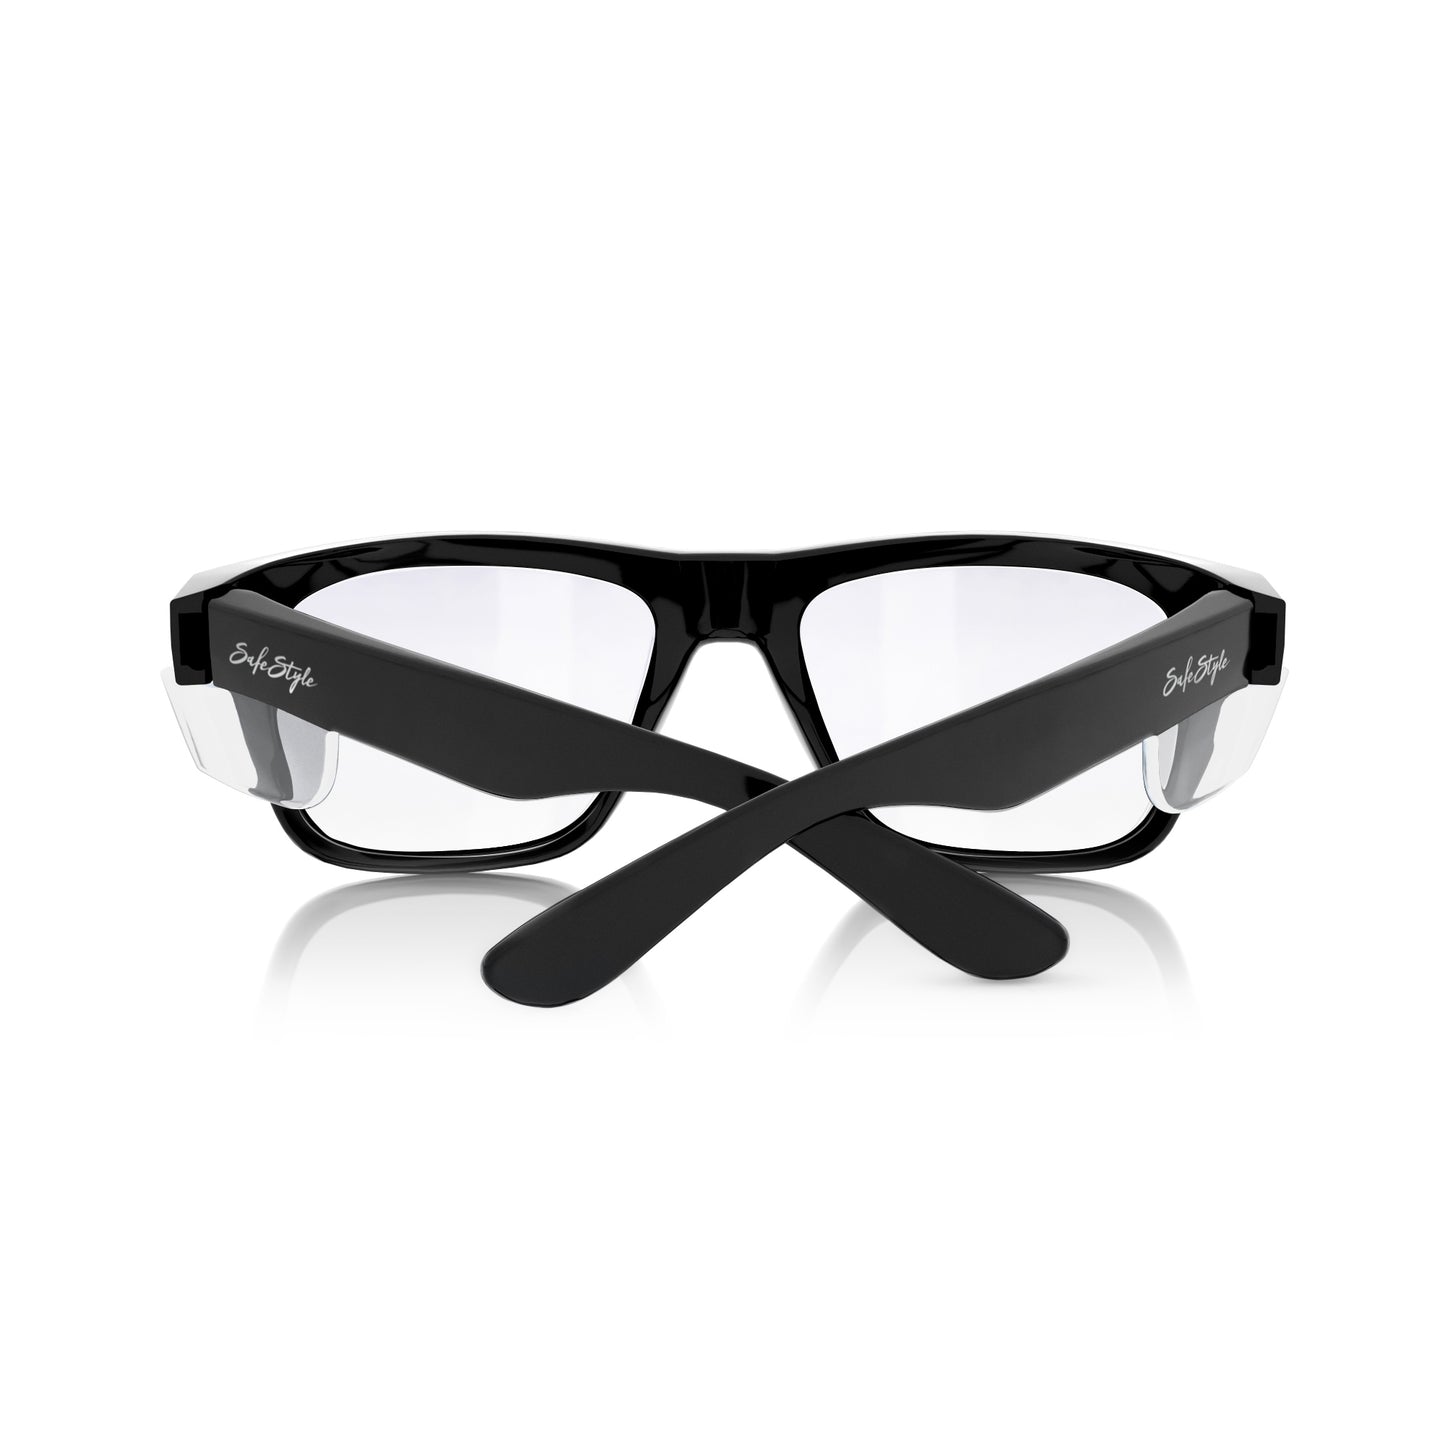 SafeStyle Fusions Black Frame/Clear UV400